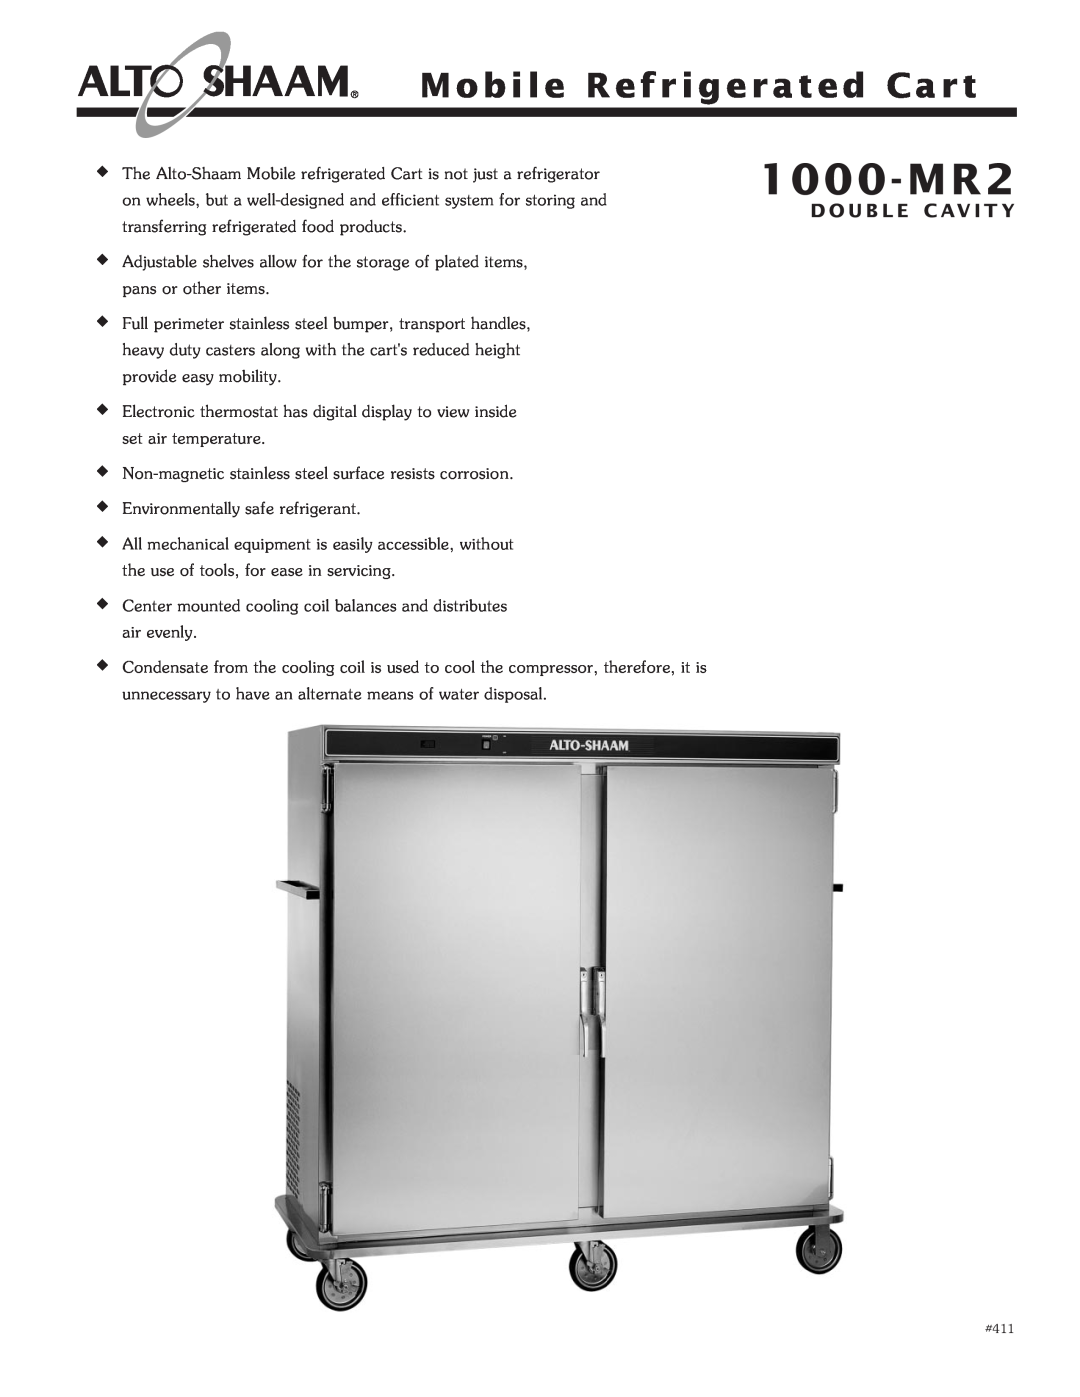 Alto-Shaam mobile refigerated cart double comopartment manual Installation Operation Maintenance, 1000-MR2, Model 